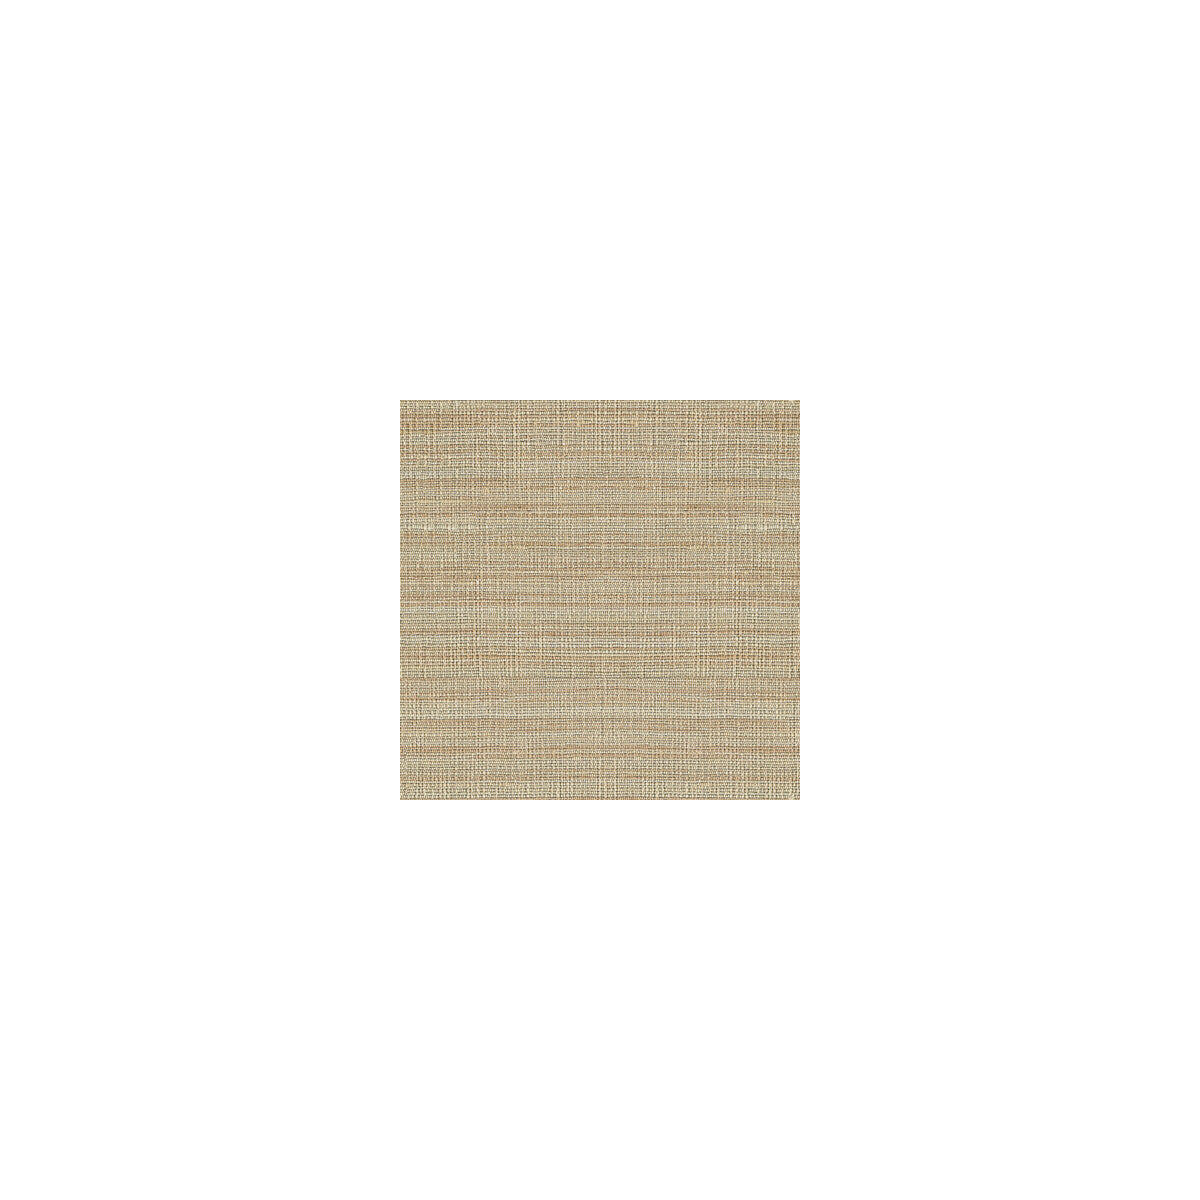 Draycott fabric in bamboo color - pattern PF50235.122.0 - by Baker Lifestyle